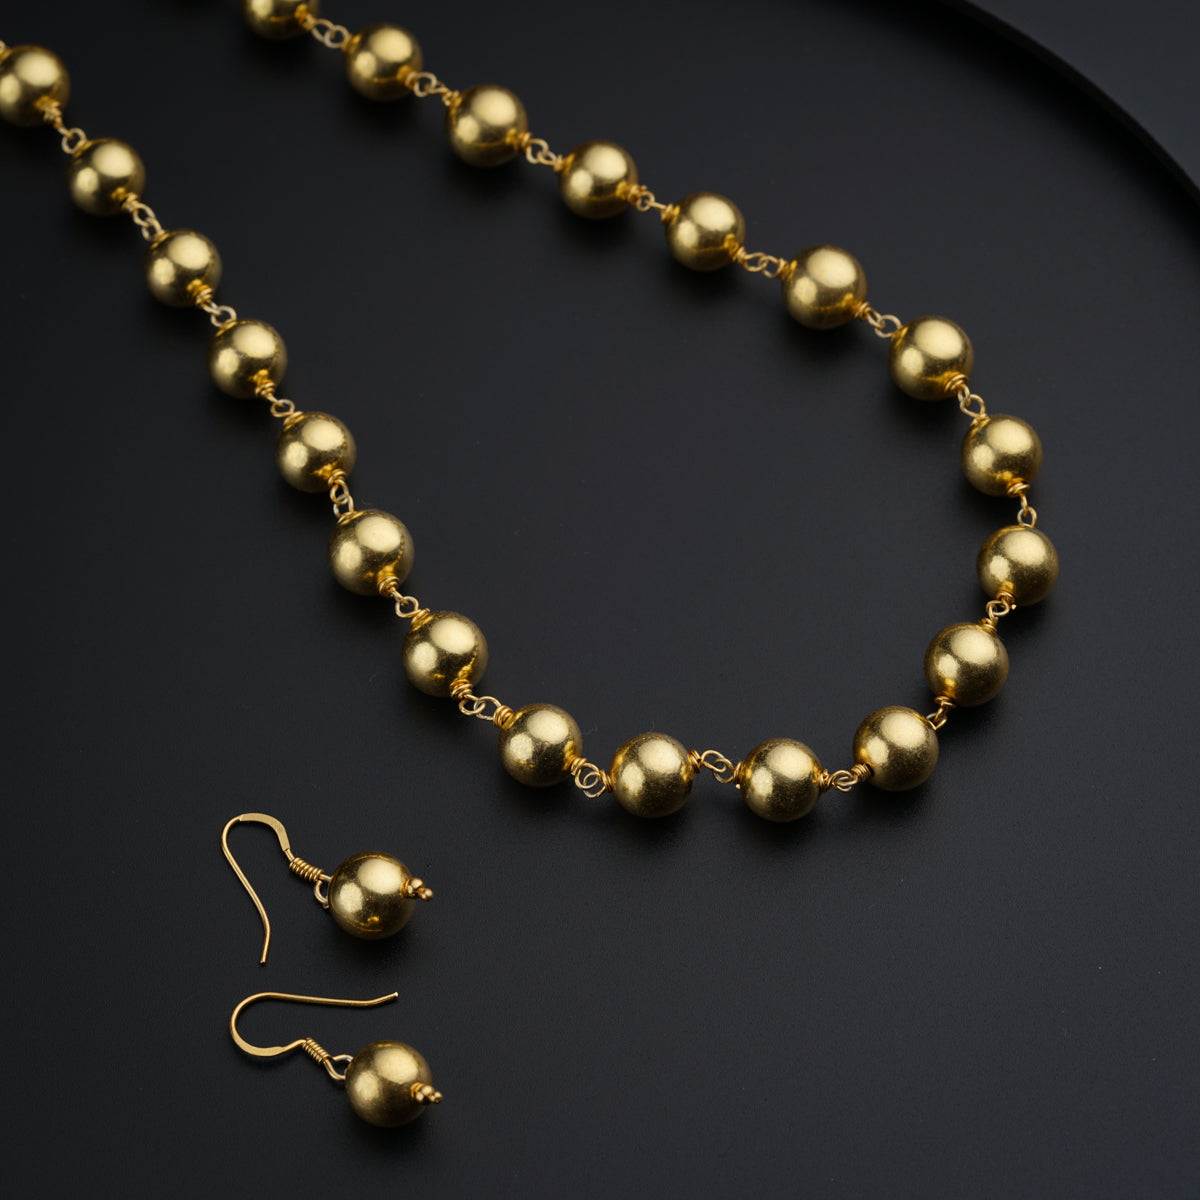 a gold bead necklace and earring set on a black surface